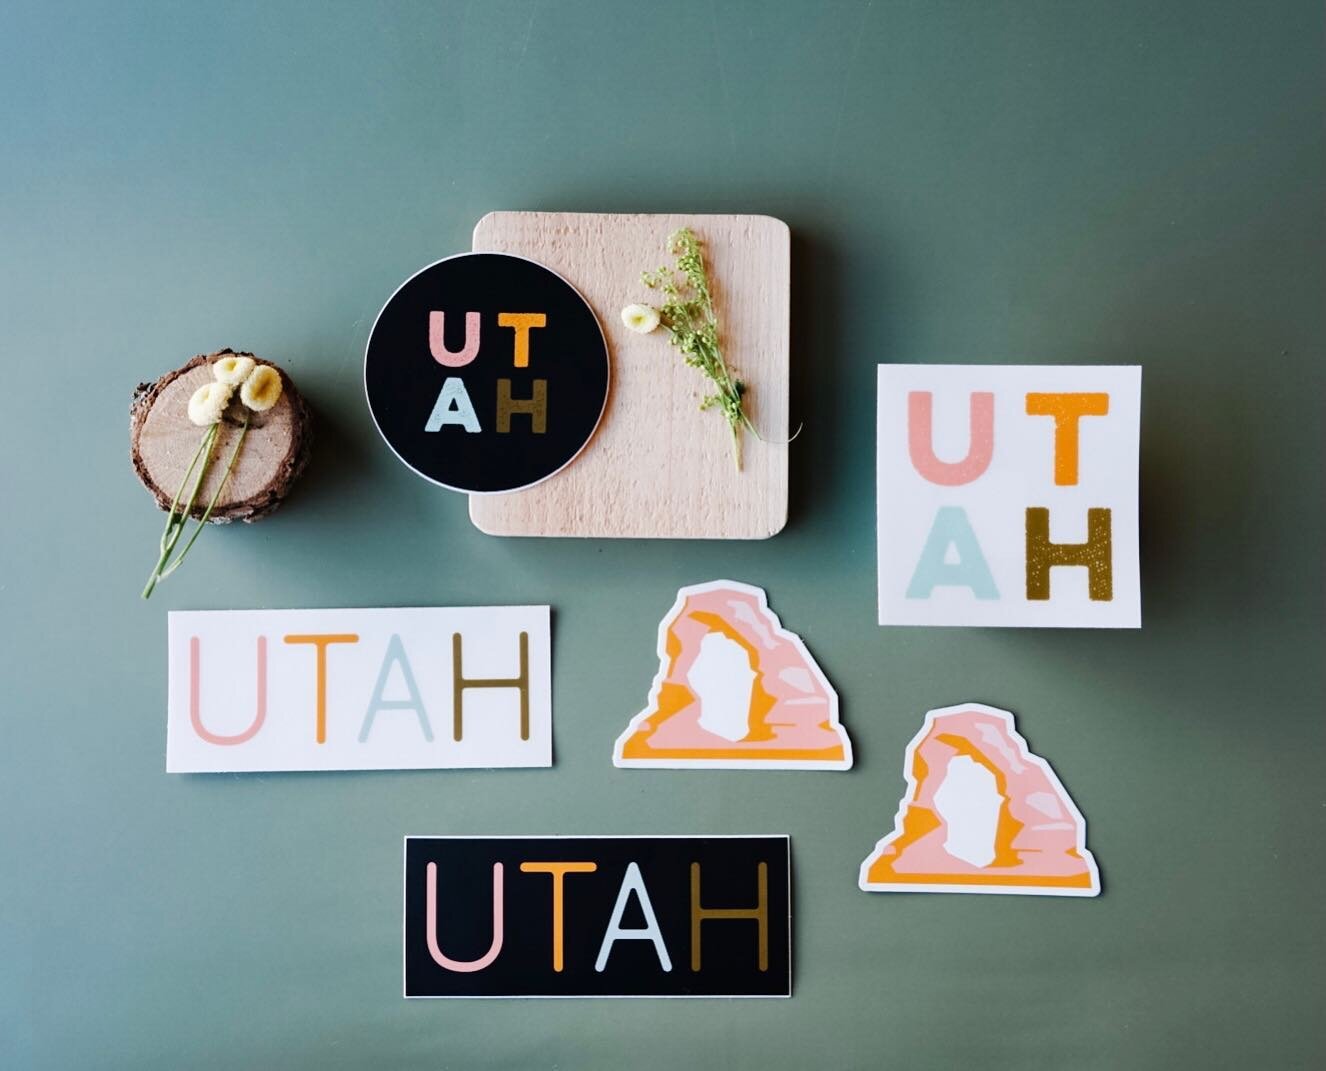 Spring is coming. Can you feel it?
I&rsquo;m working on a whole new set of products for spring and it&rsquo;s feeling like a rebirth. My old Utah stickers have been a best seller @saltandhoneymarket. What should I design next?